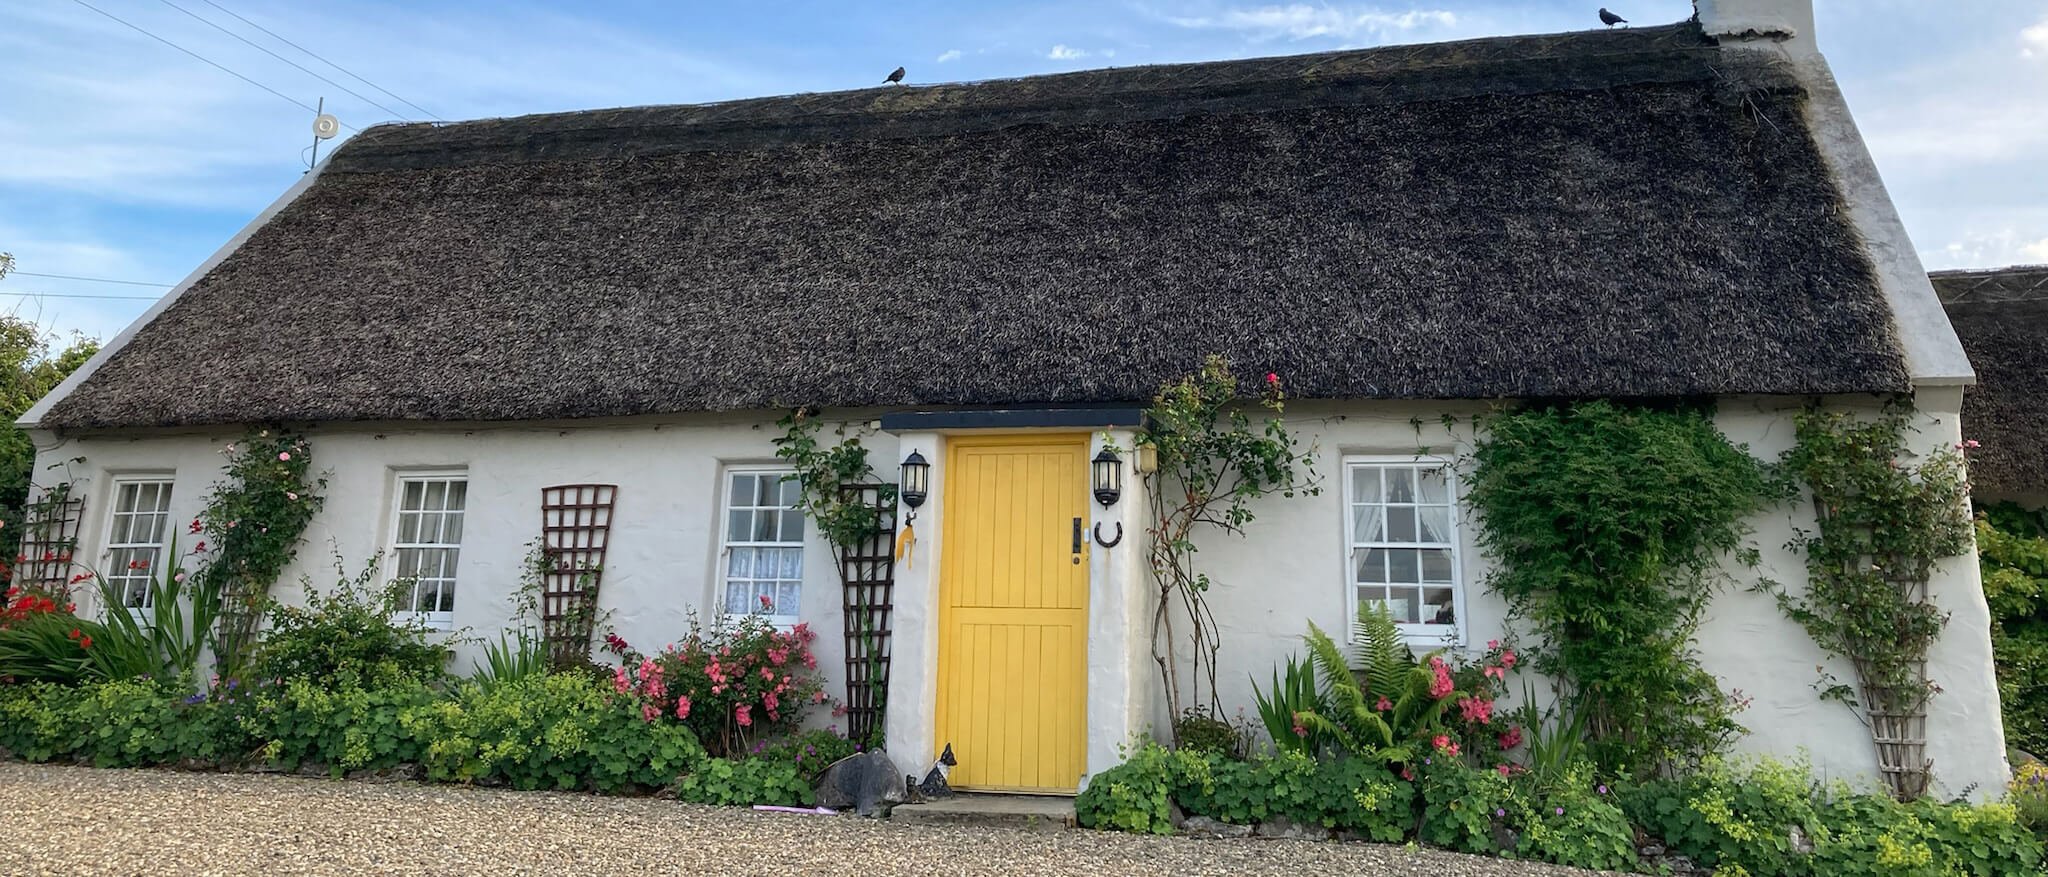 Cute cottage  on a tour of the Wild Atlantic Way in Ireland